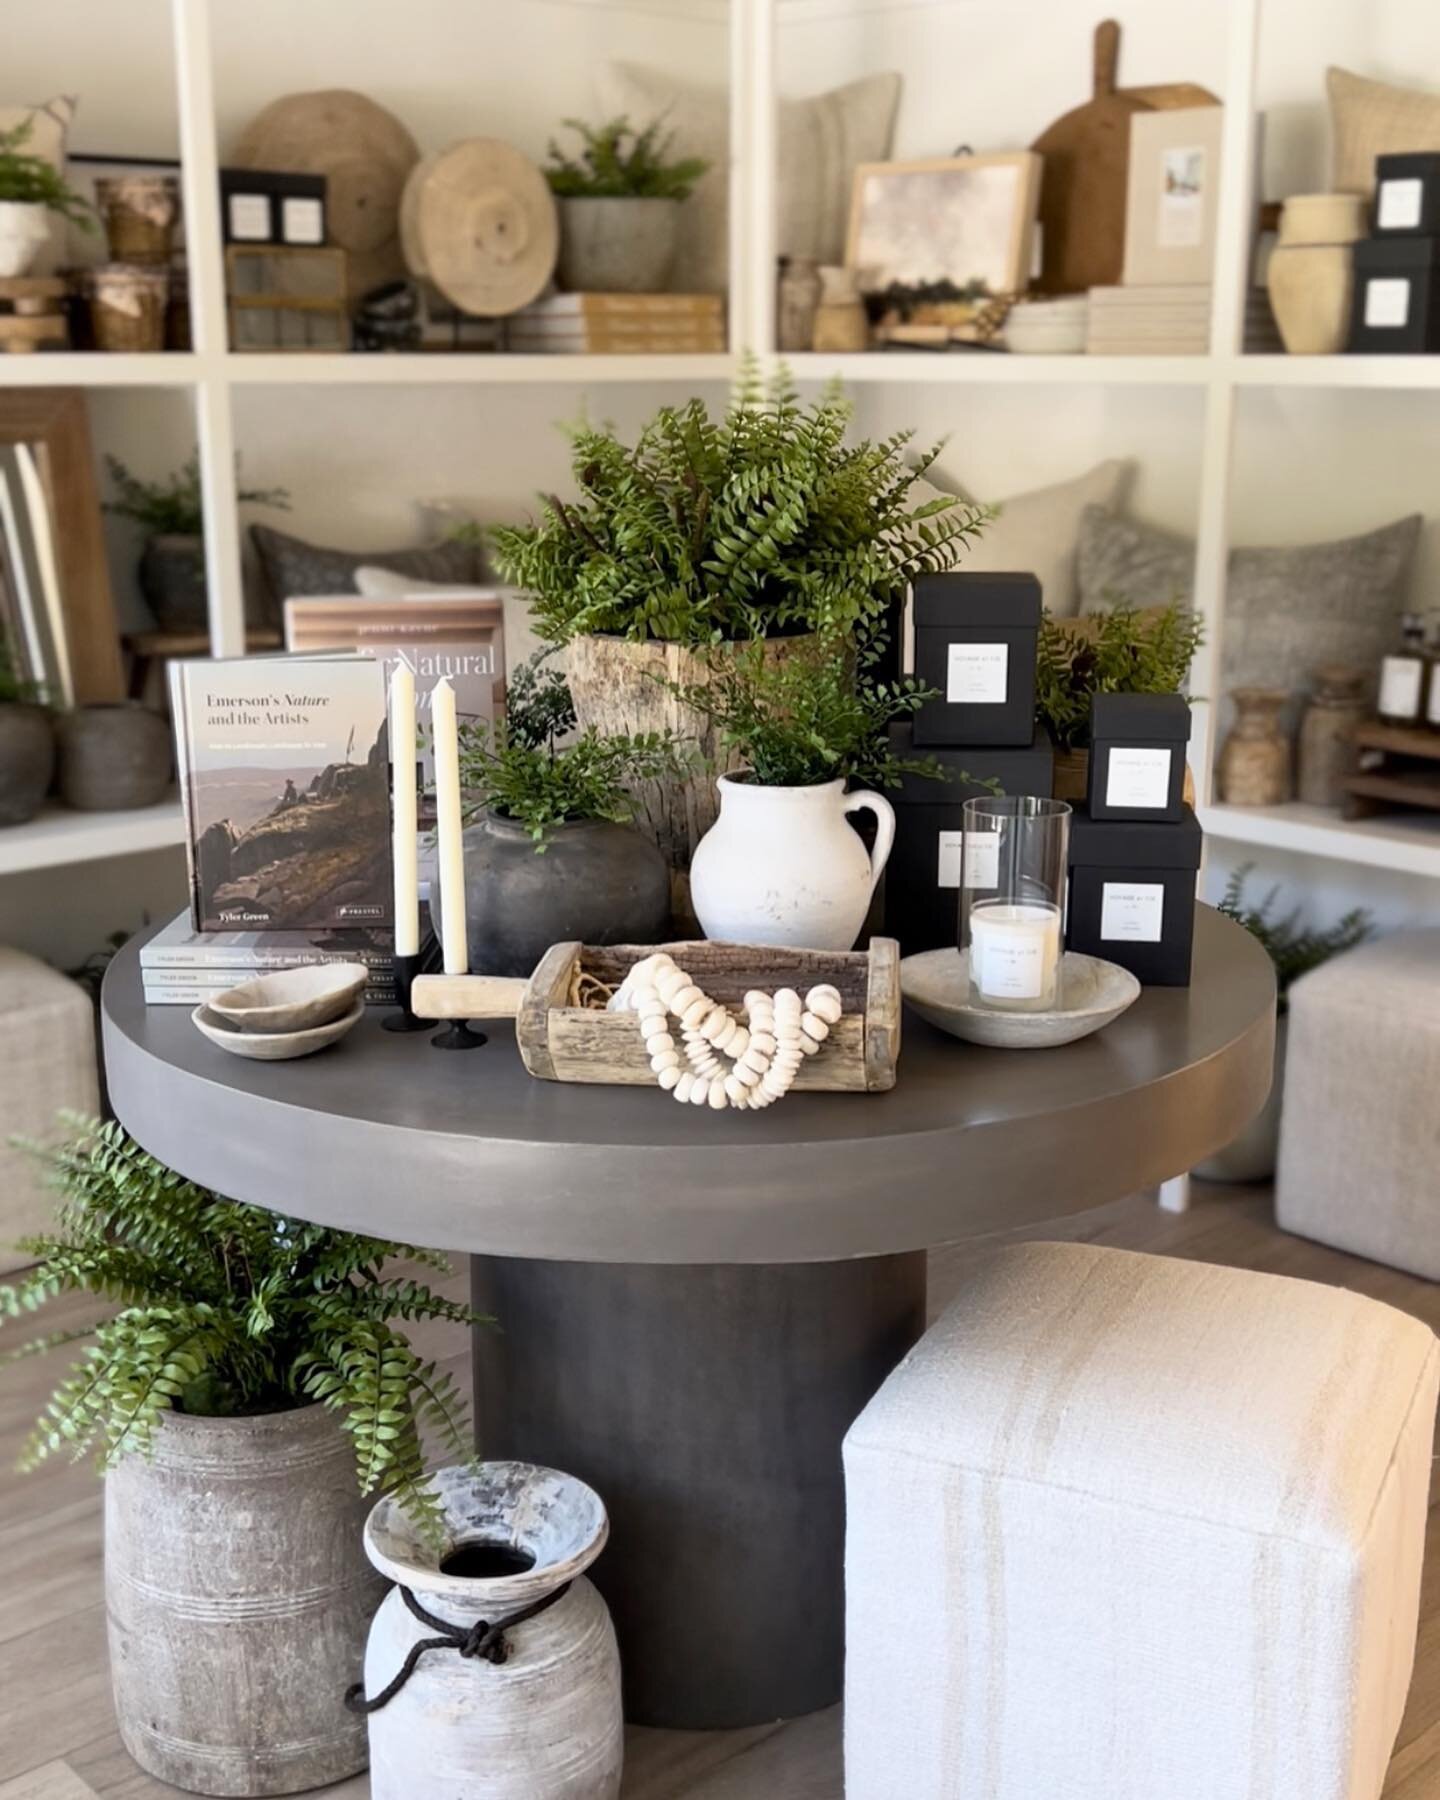 It&rsquo;s been months in the making and The Shoppe is turning into a beautifully curated space for our clients and locals to come shop. Hang tight as we head into the last weeks of announcing when our grand opening will be! 
#skdshoppe #skd #shannon